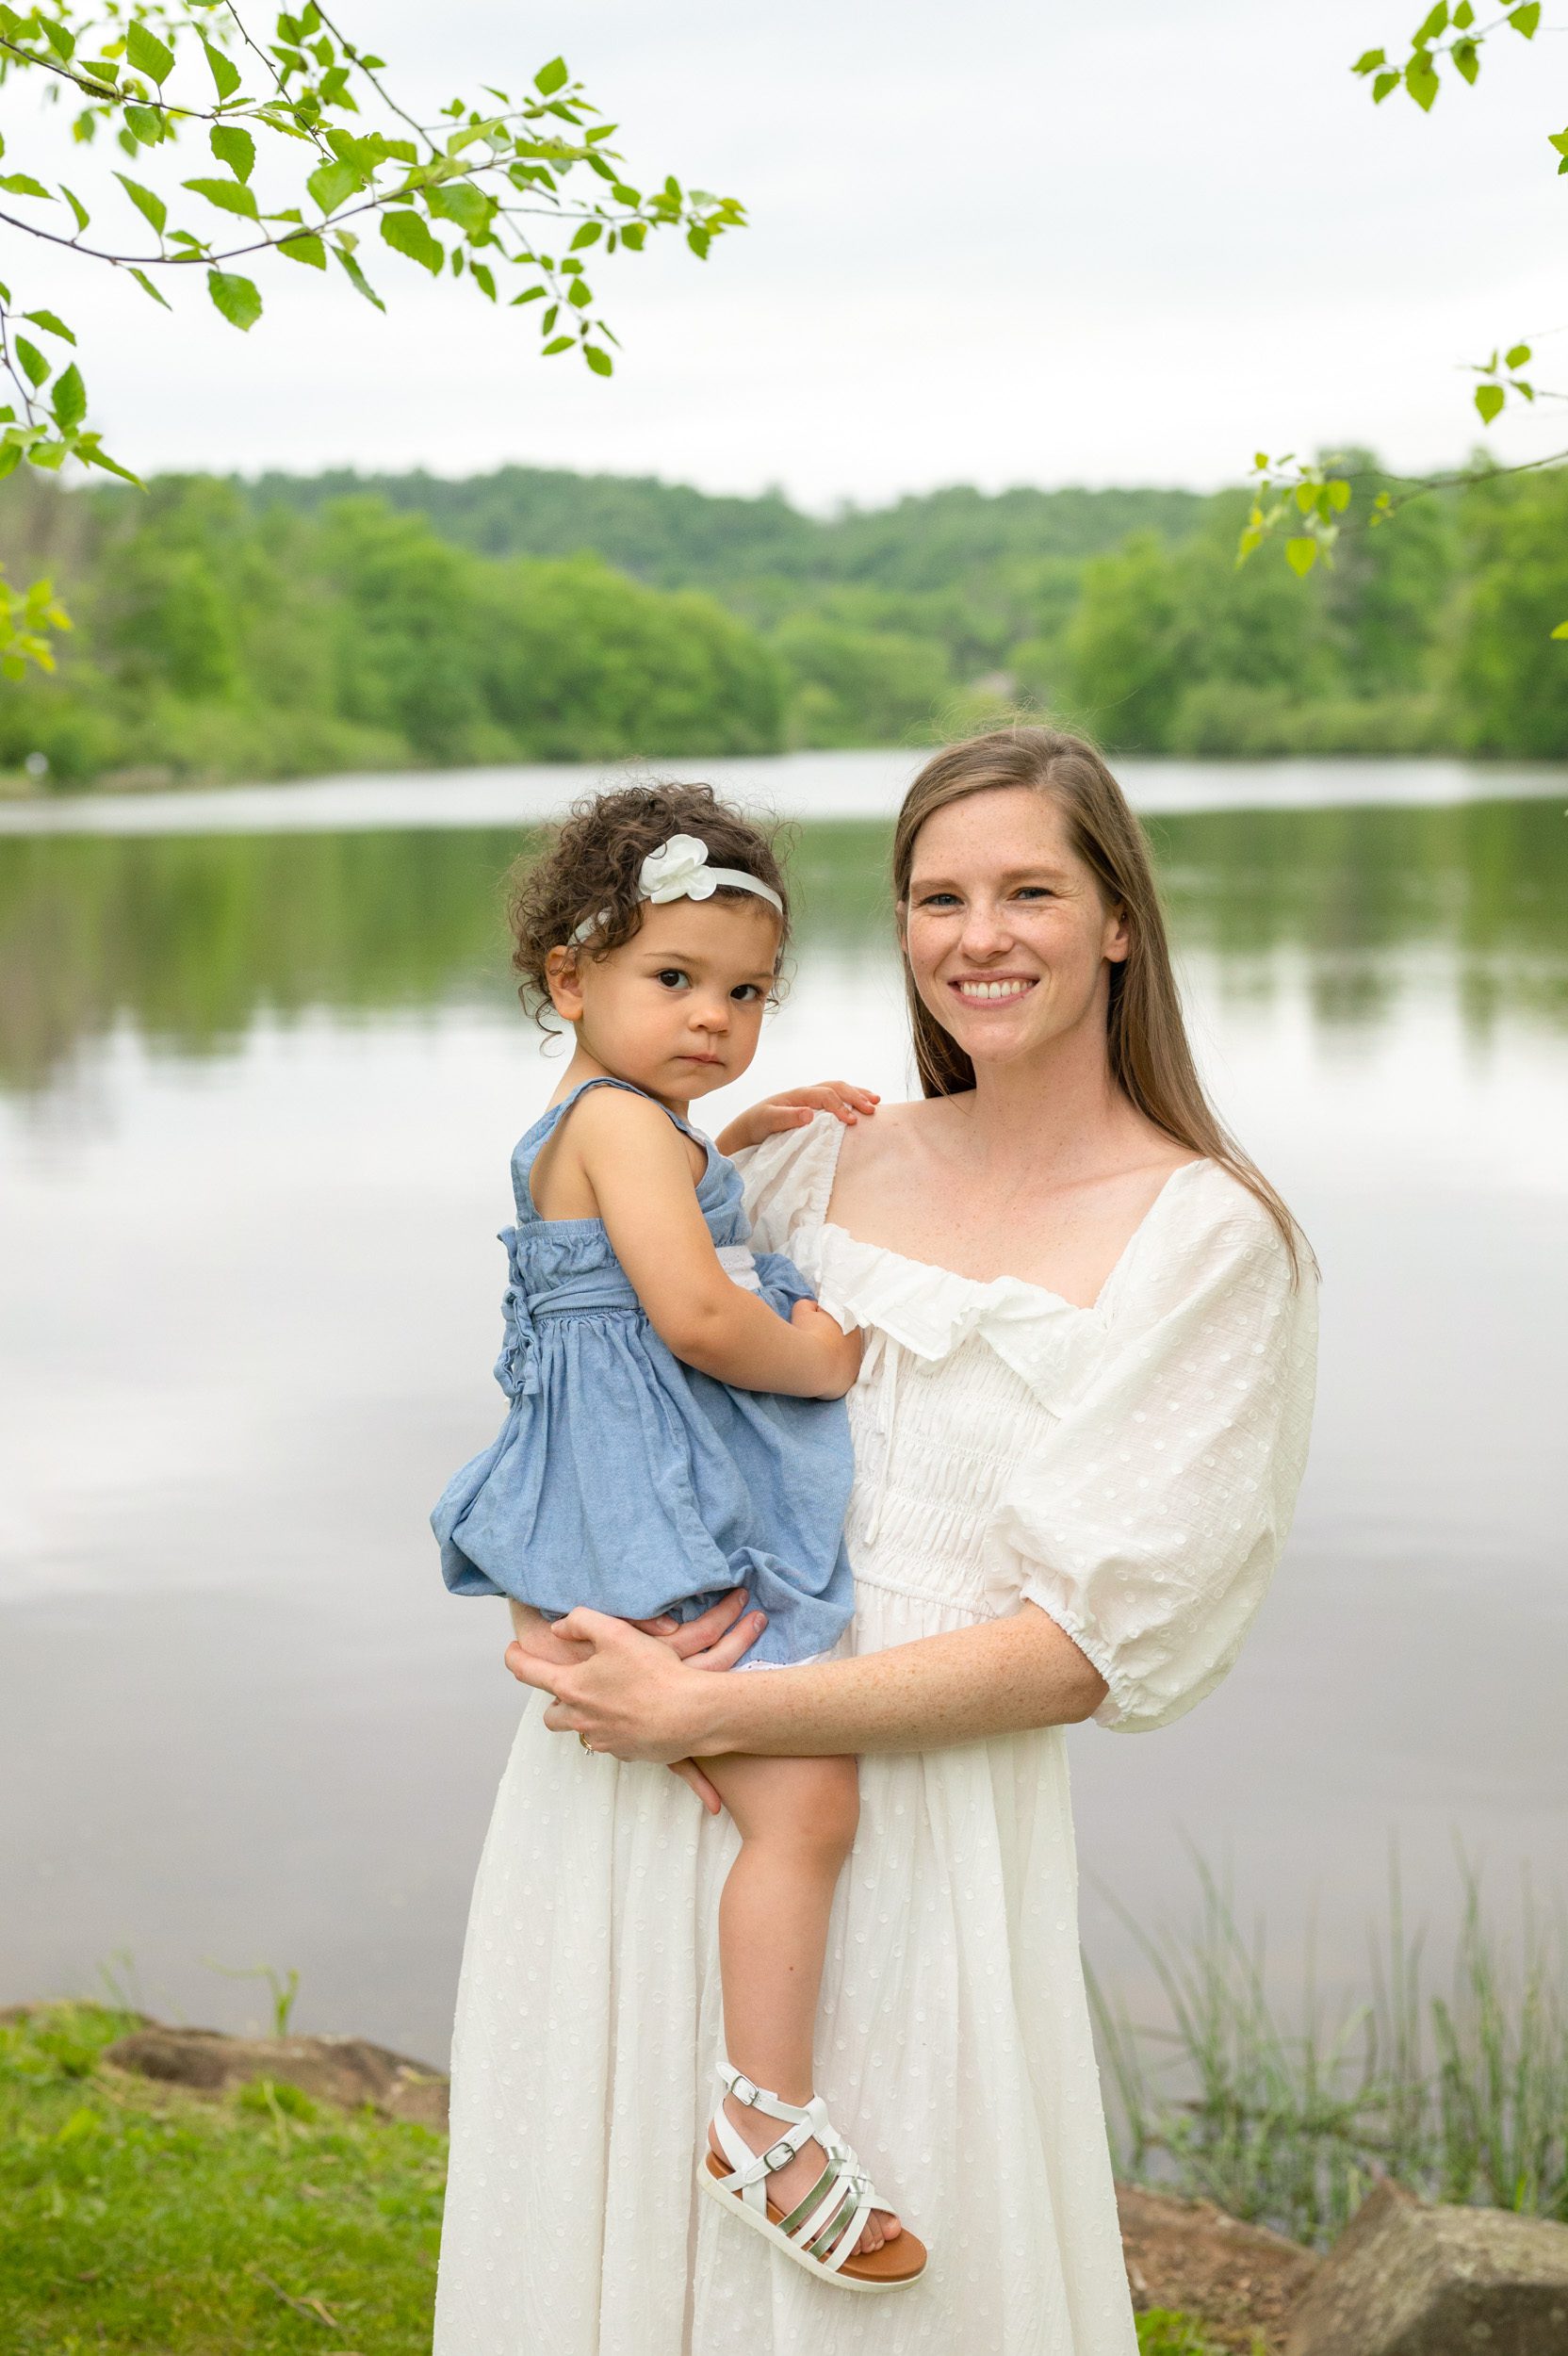 A mom holding her daughter in front of a lake during a family photo session